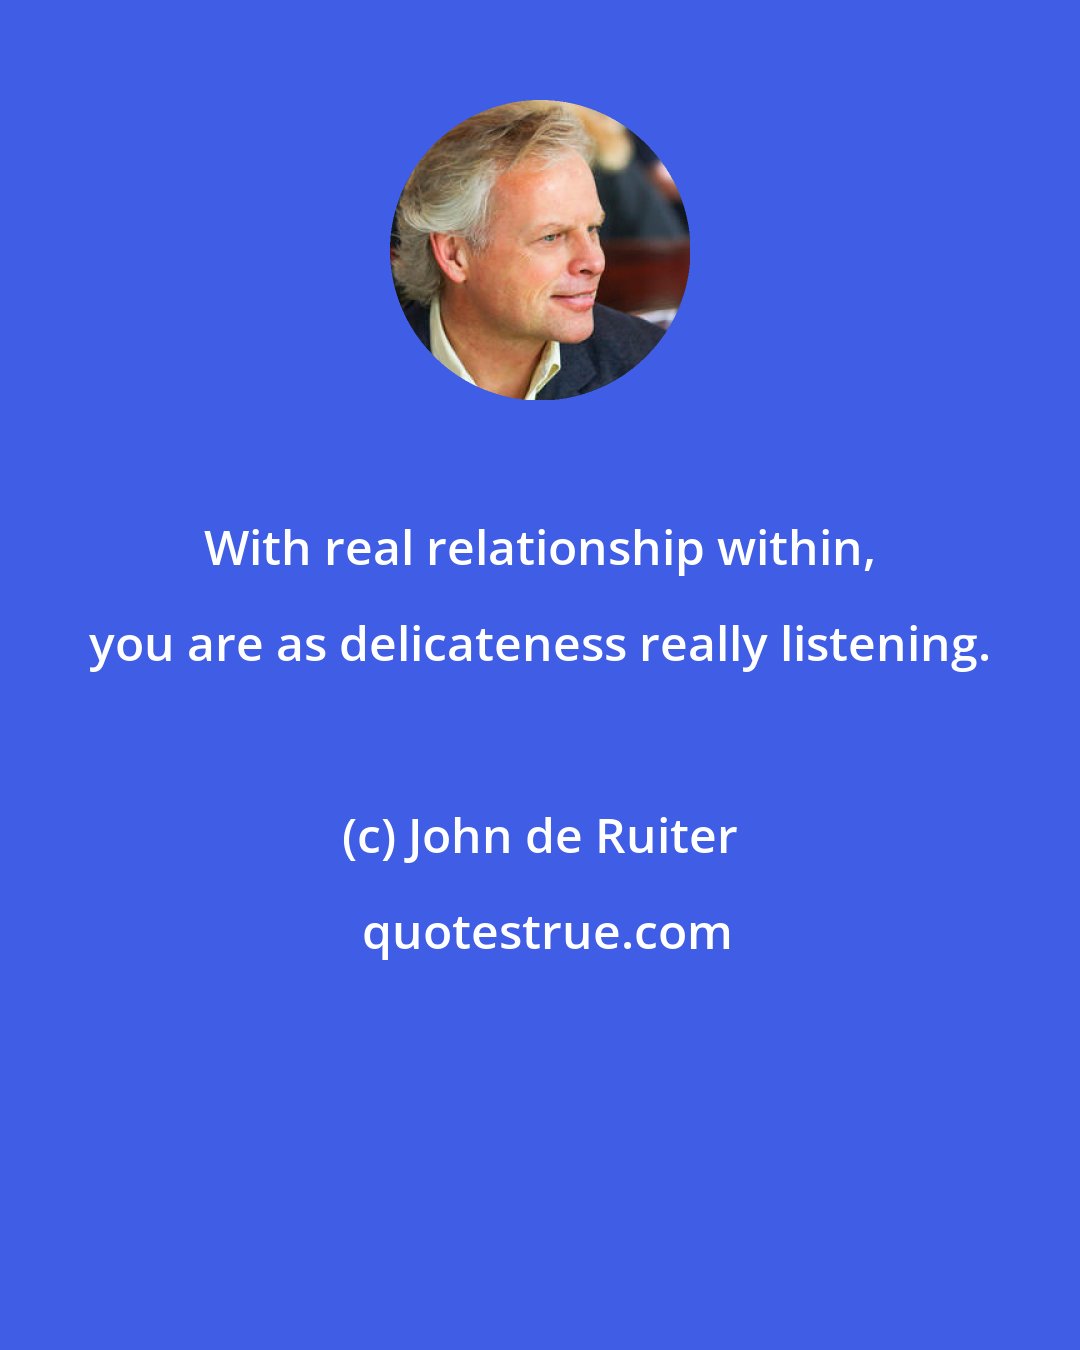 John de Ruiter: With real relationship within, you are as delicateness really listening.